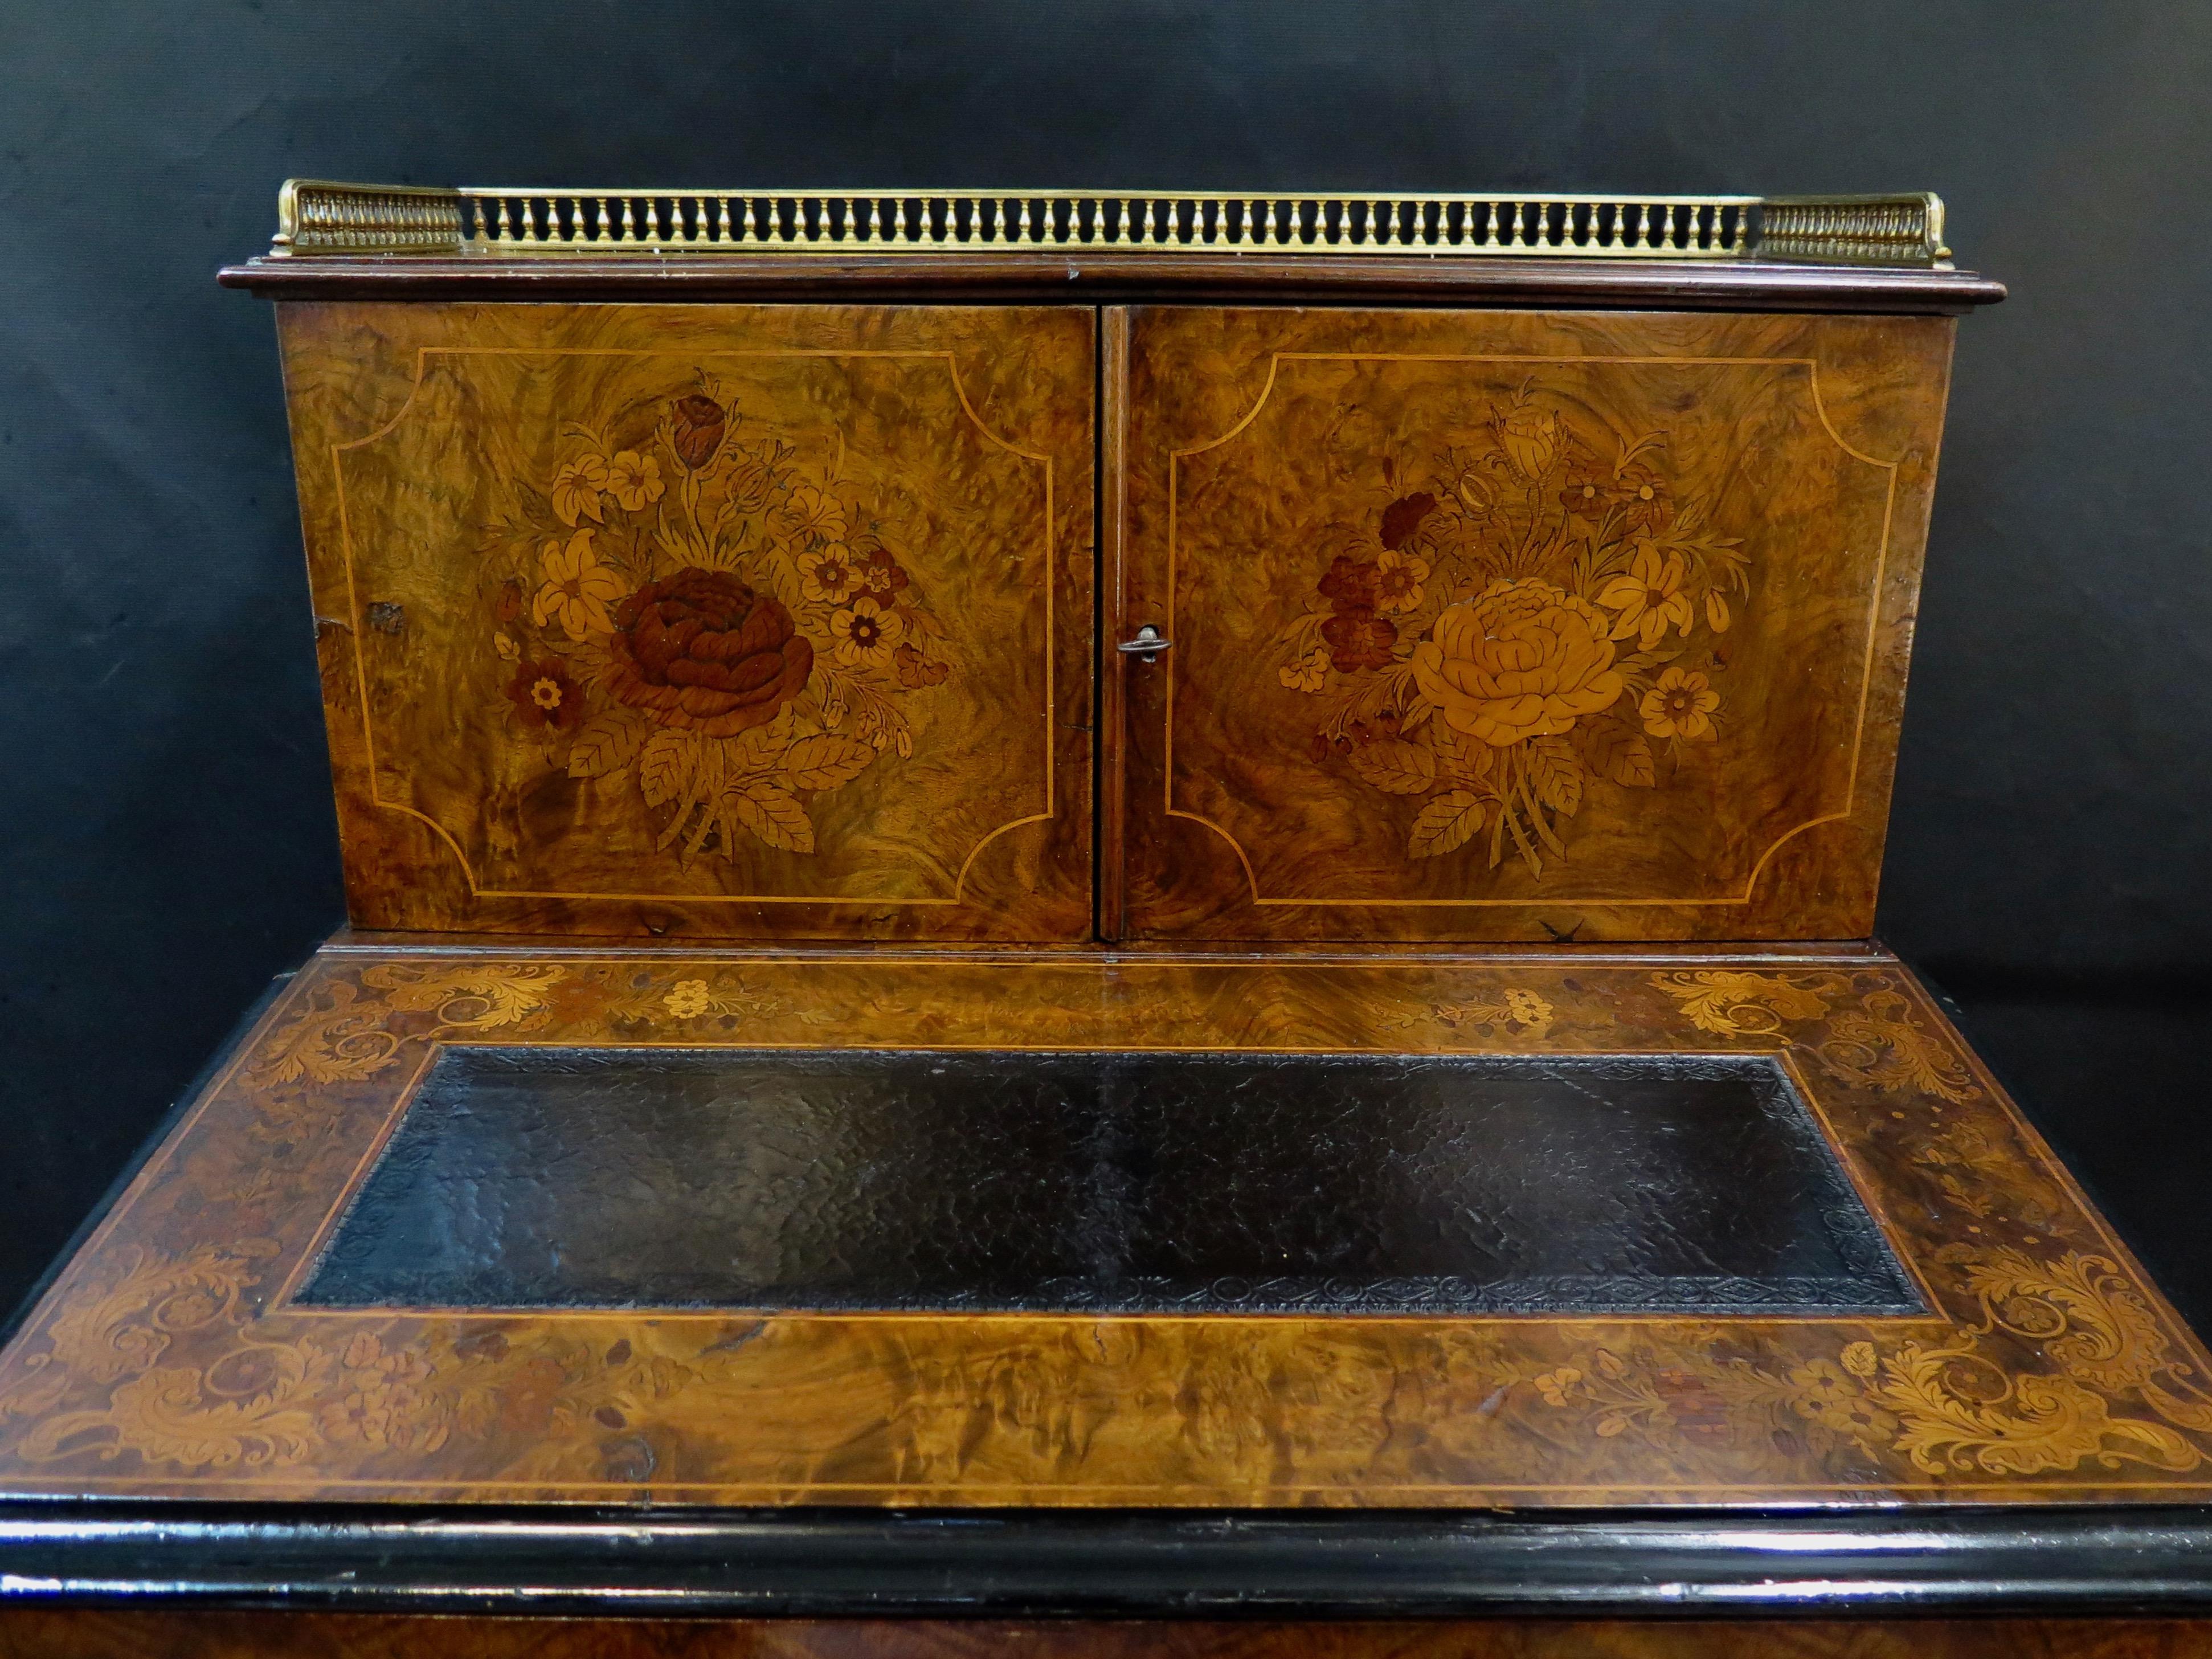 This charming late 19th century French ladies desk is beautifully decorated with handcrafted inlaid decorations in a burl wood. The compact desk has a rectangular black leather insert writing surface in its hinged lid cover
which, when open,